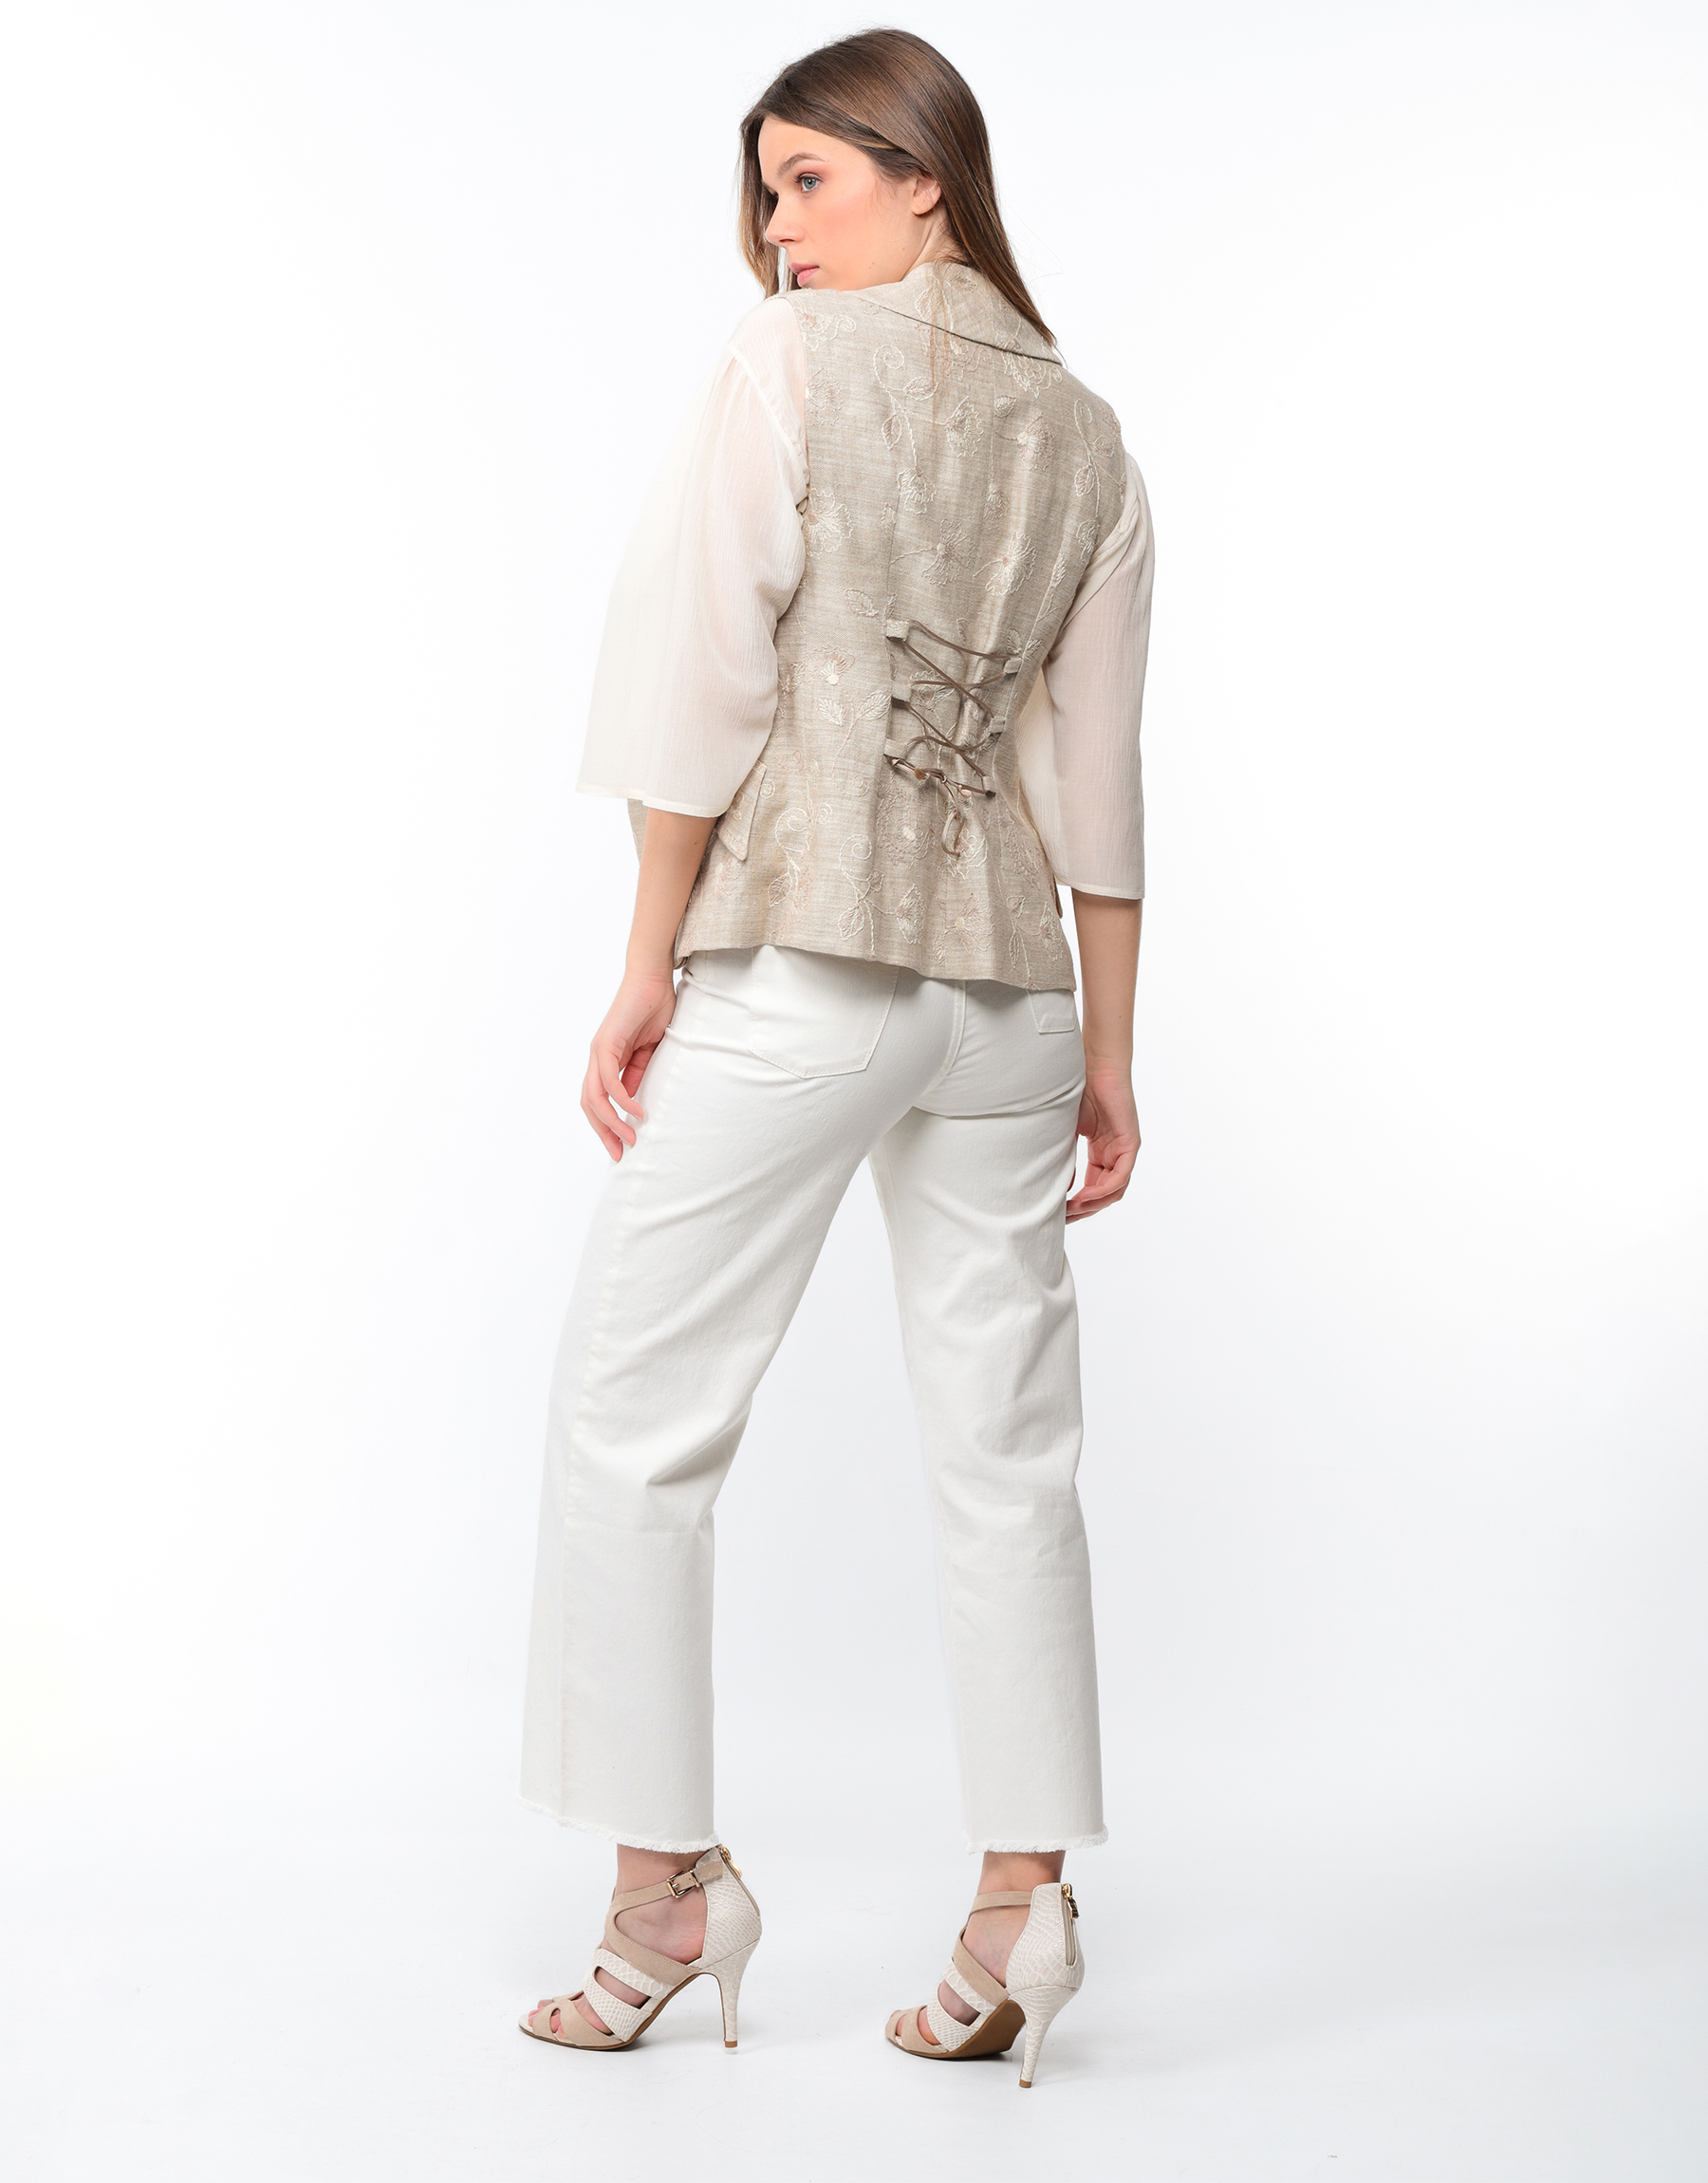 Sleeveless jacket in mottled canvas embroidered beige and ivory